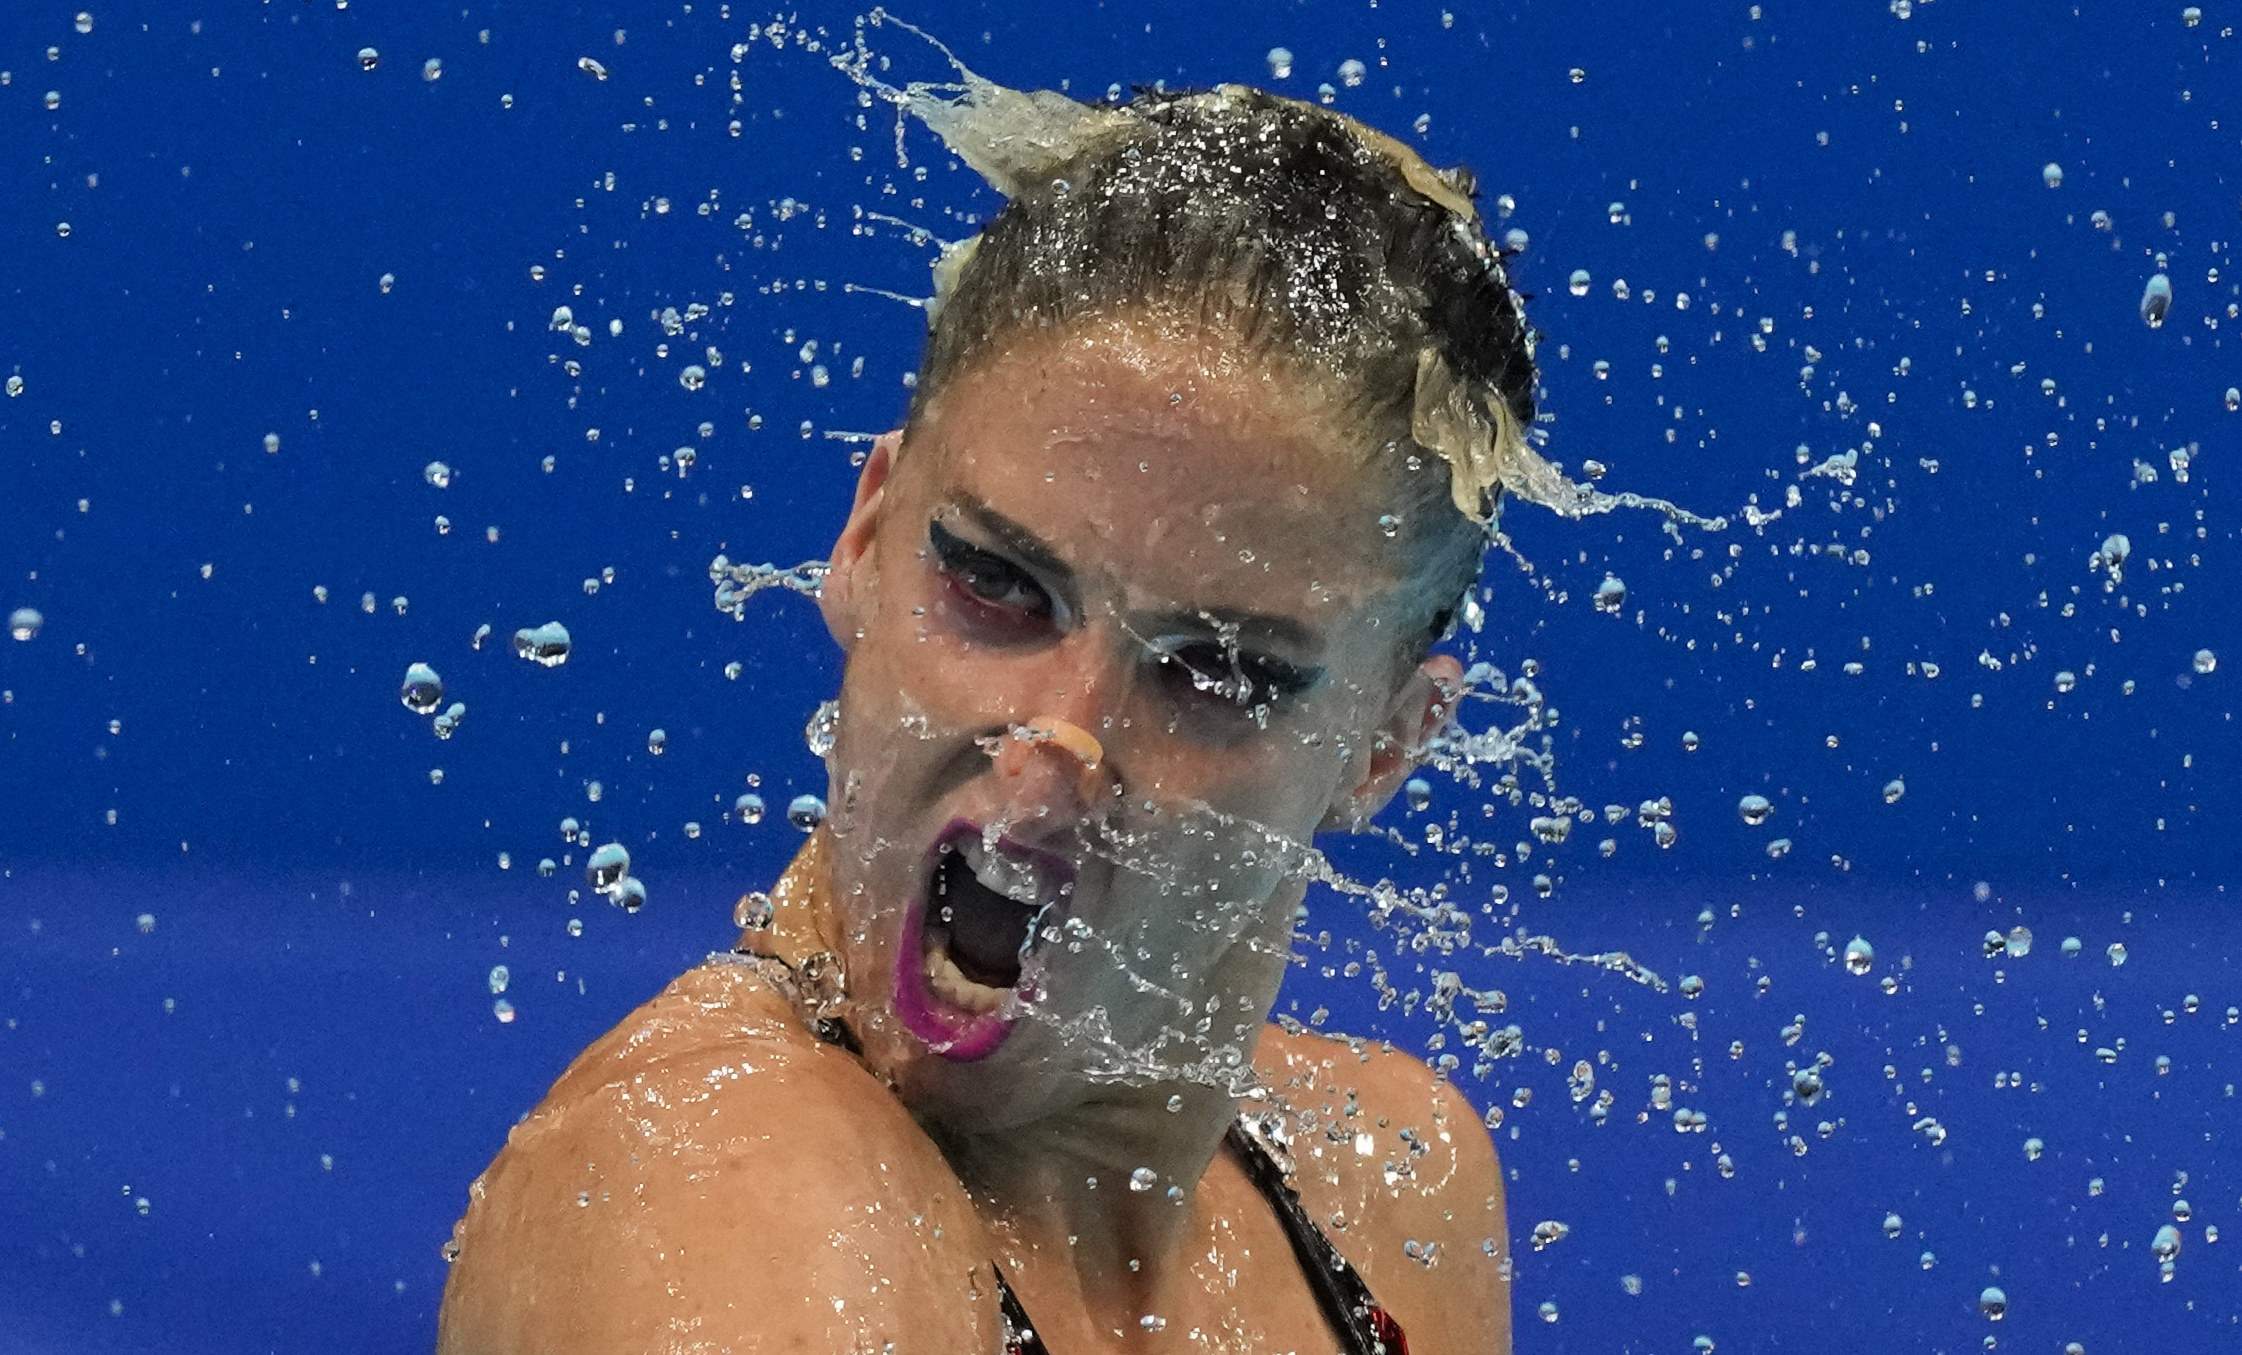 A woman swimmer spins her head, hundreds of droplets of water frozen mid-air around her